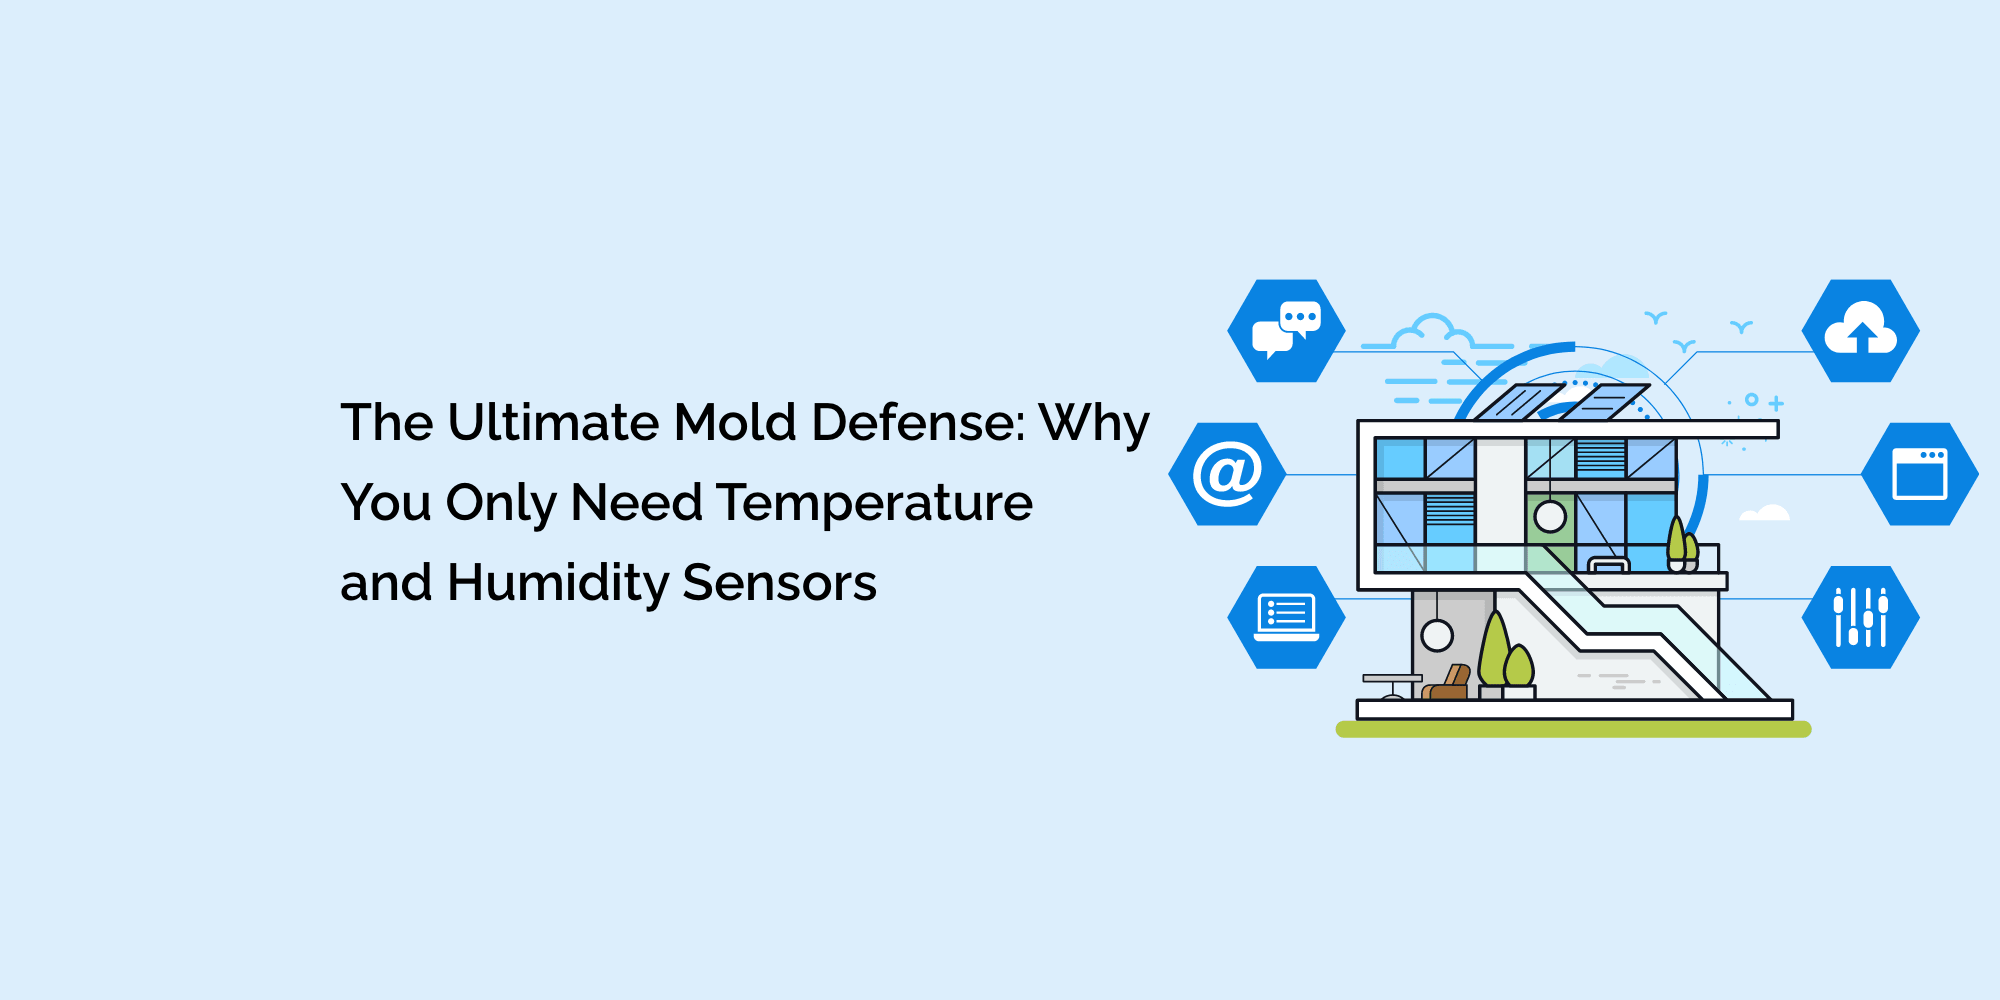 The Ultimate Mold Defense: Why You Only Need Temperature and Humidity Sensors